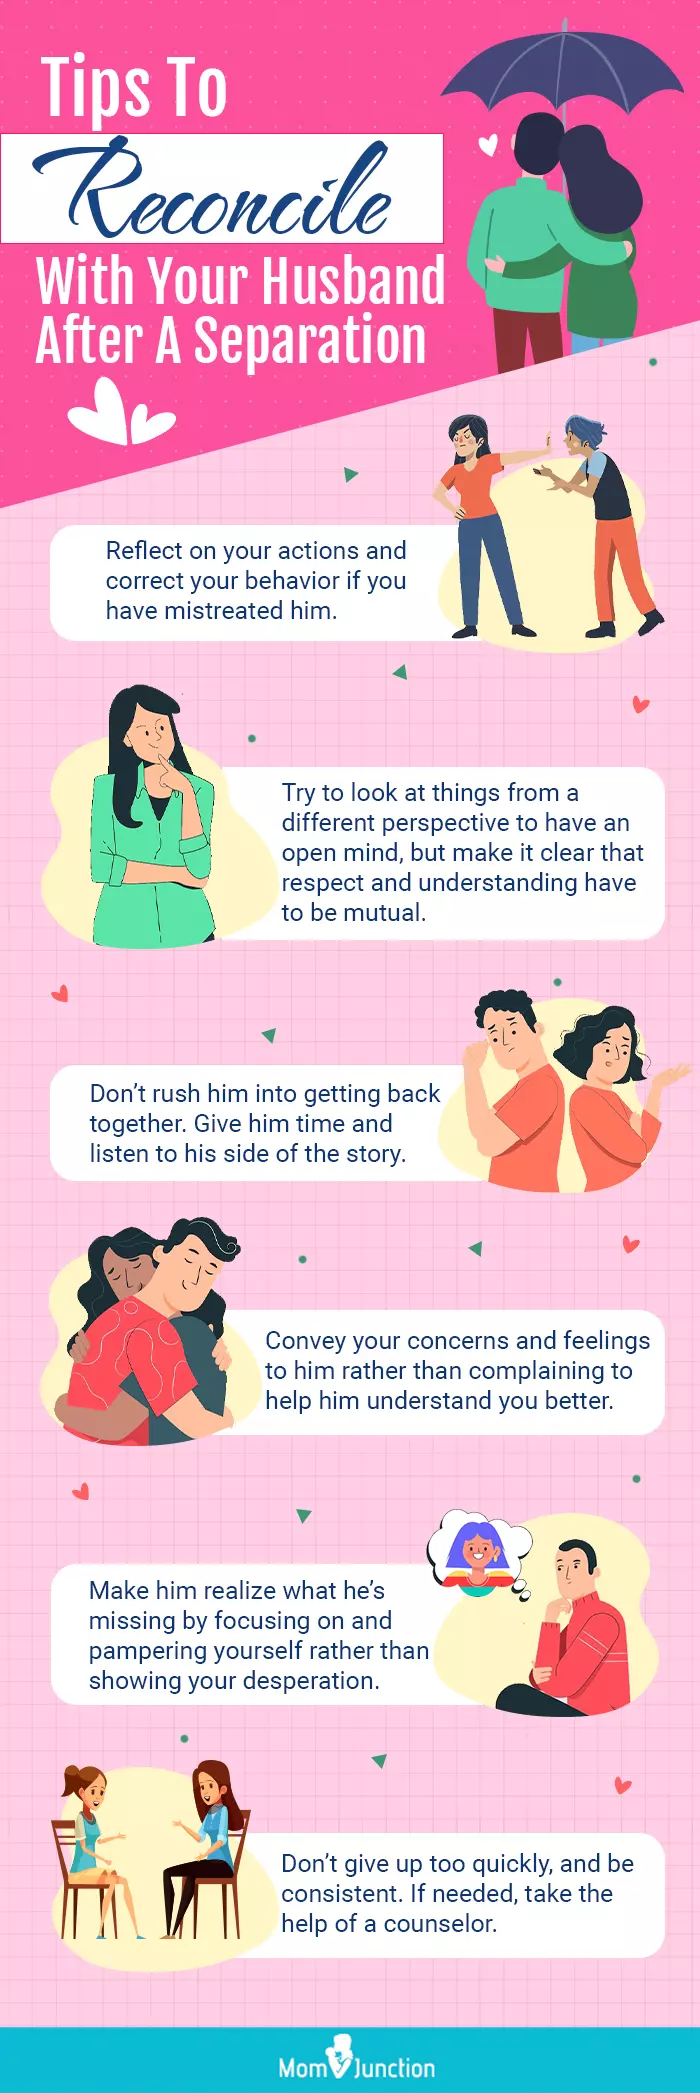 tips to reconcile with your husband after a separation (infographic)